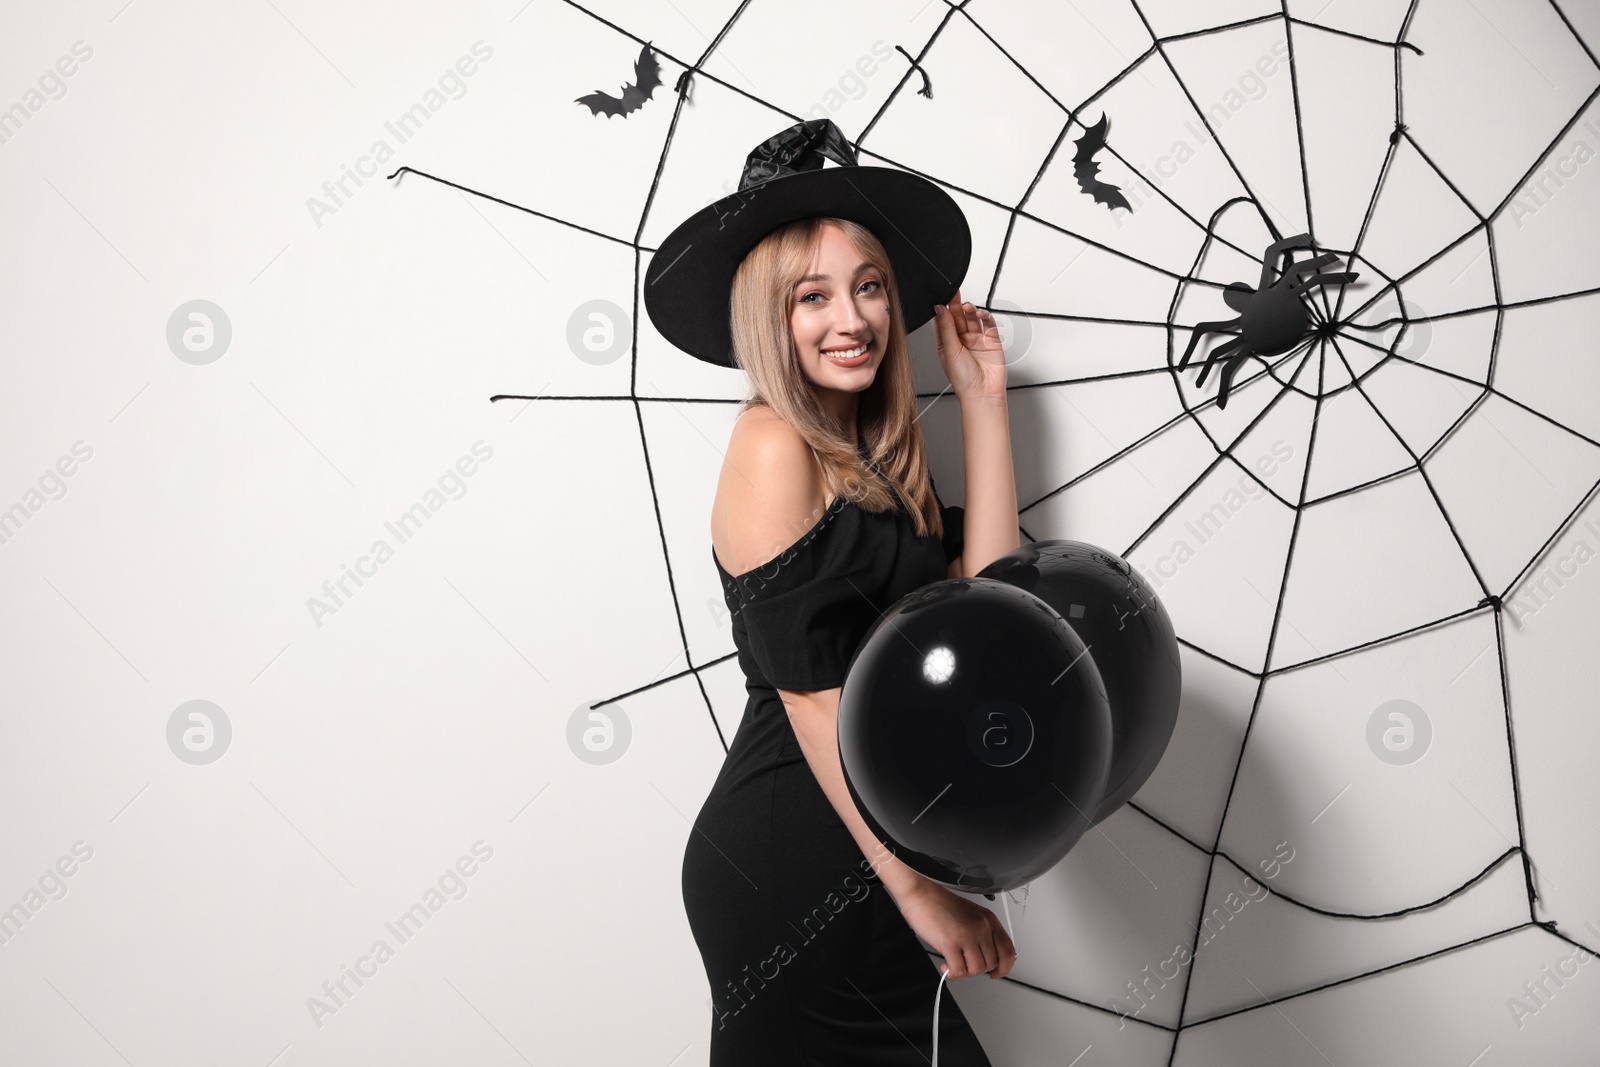 Photo of Woman in witch hat with balloons posing near white wall decorated for Halloween